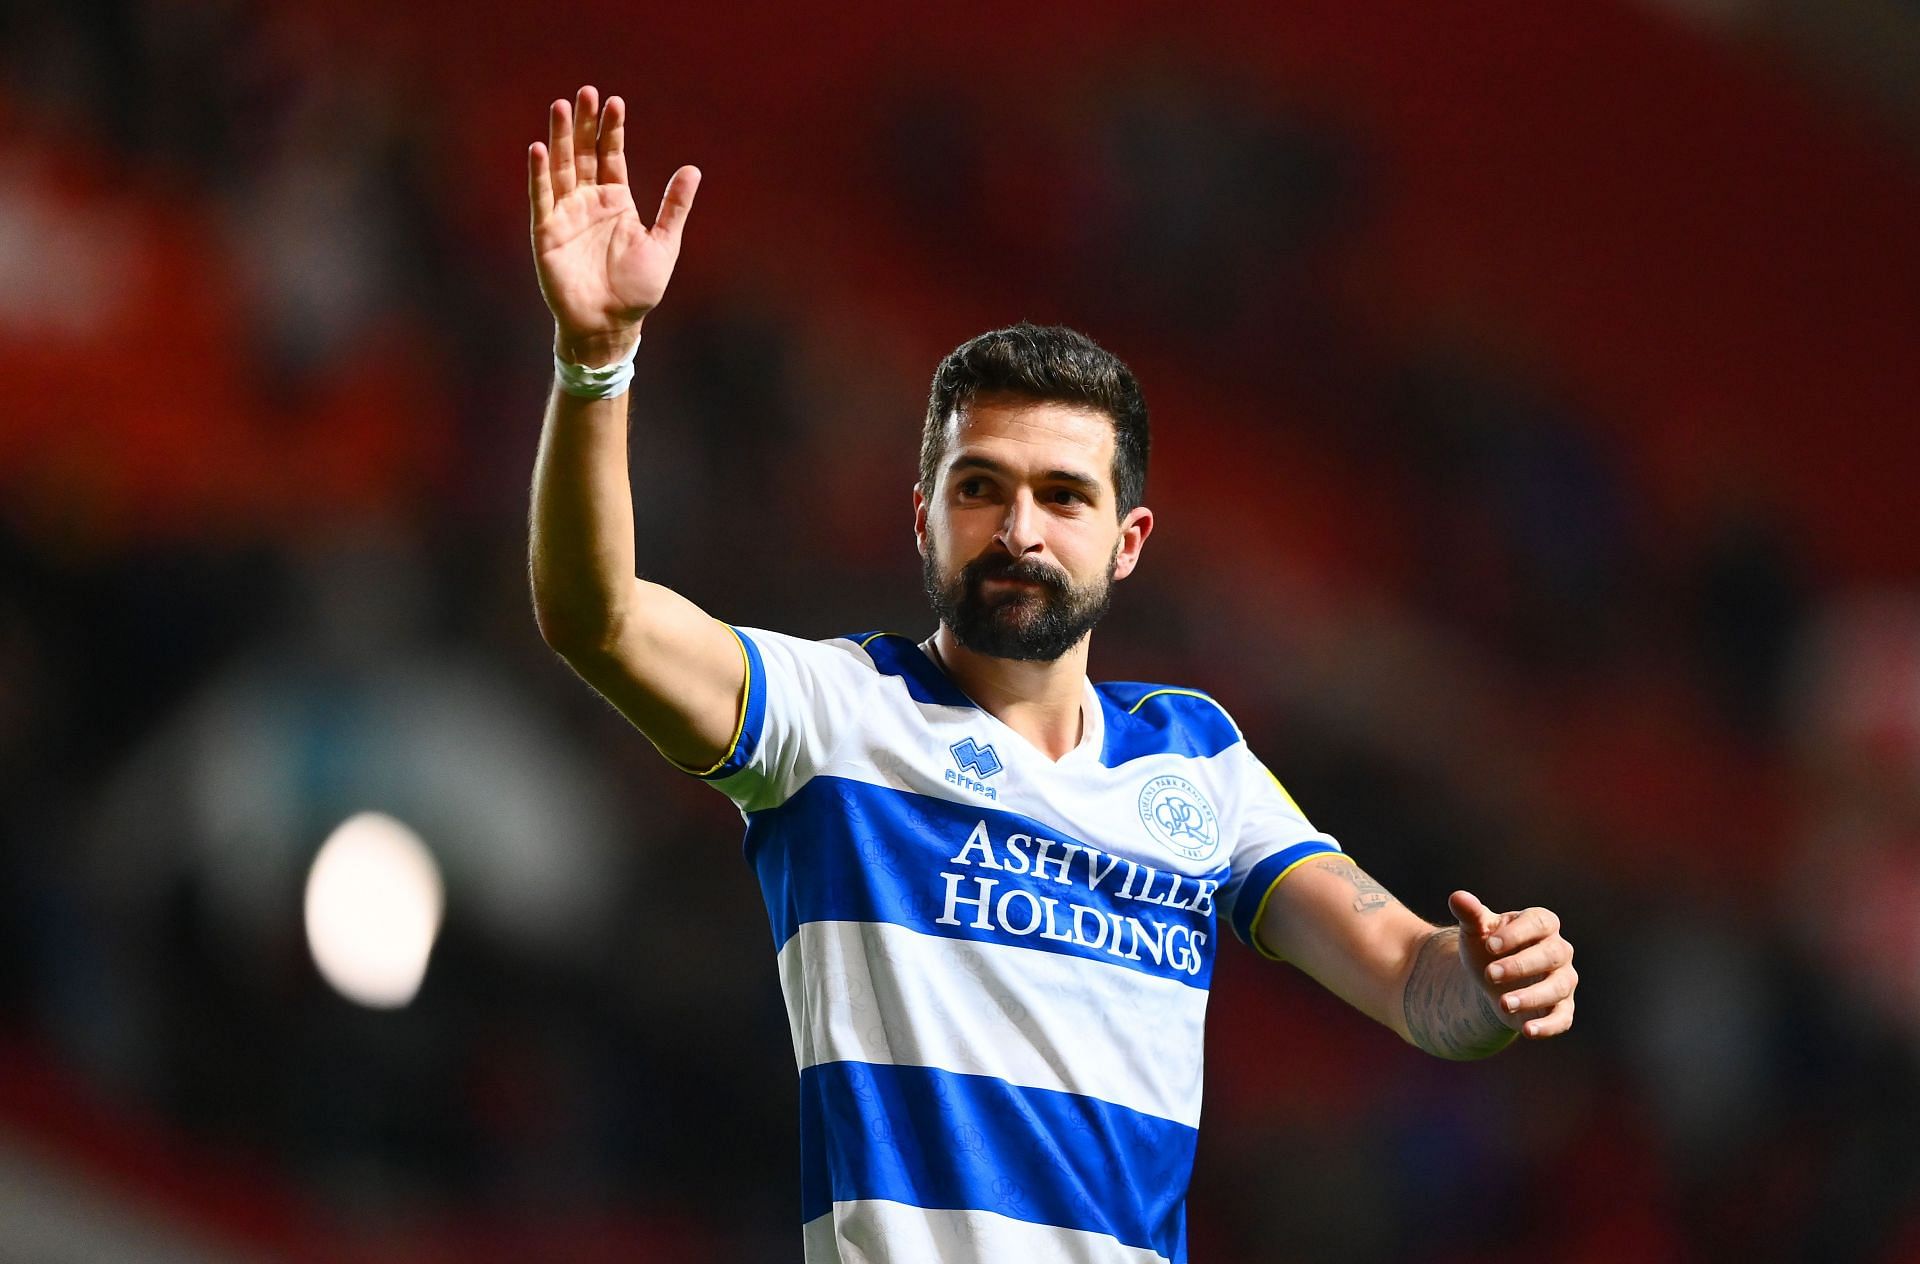 Queens Park Rangers face Birmingham City in their Championship fixture on Sunday